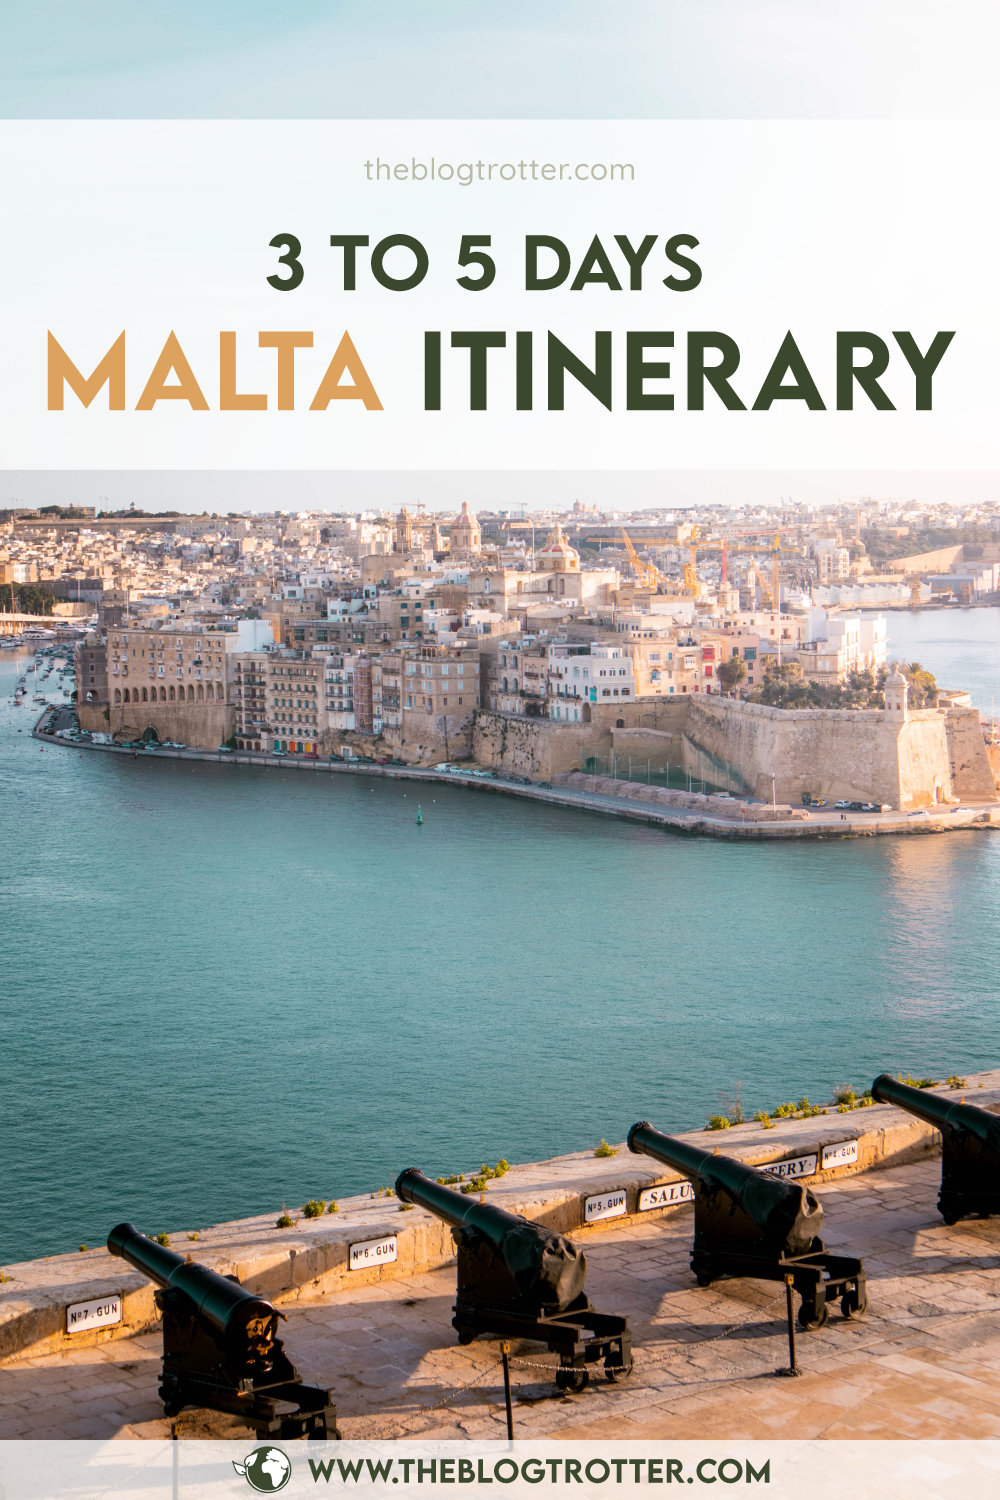 Malta itinerary article visual for Pinterest - Option 5